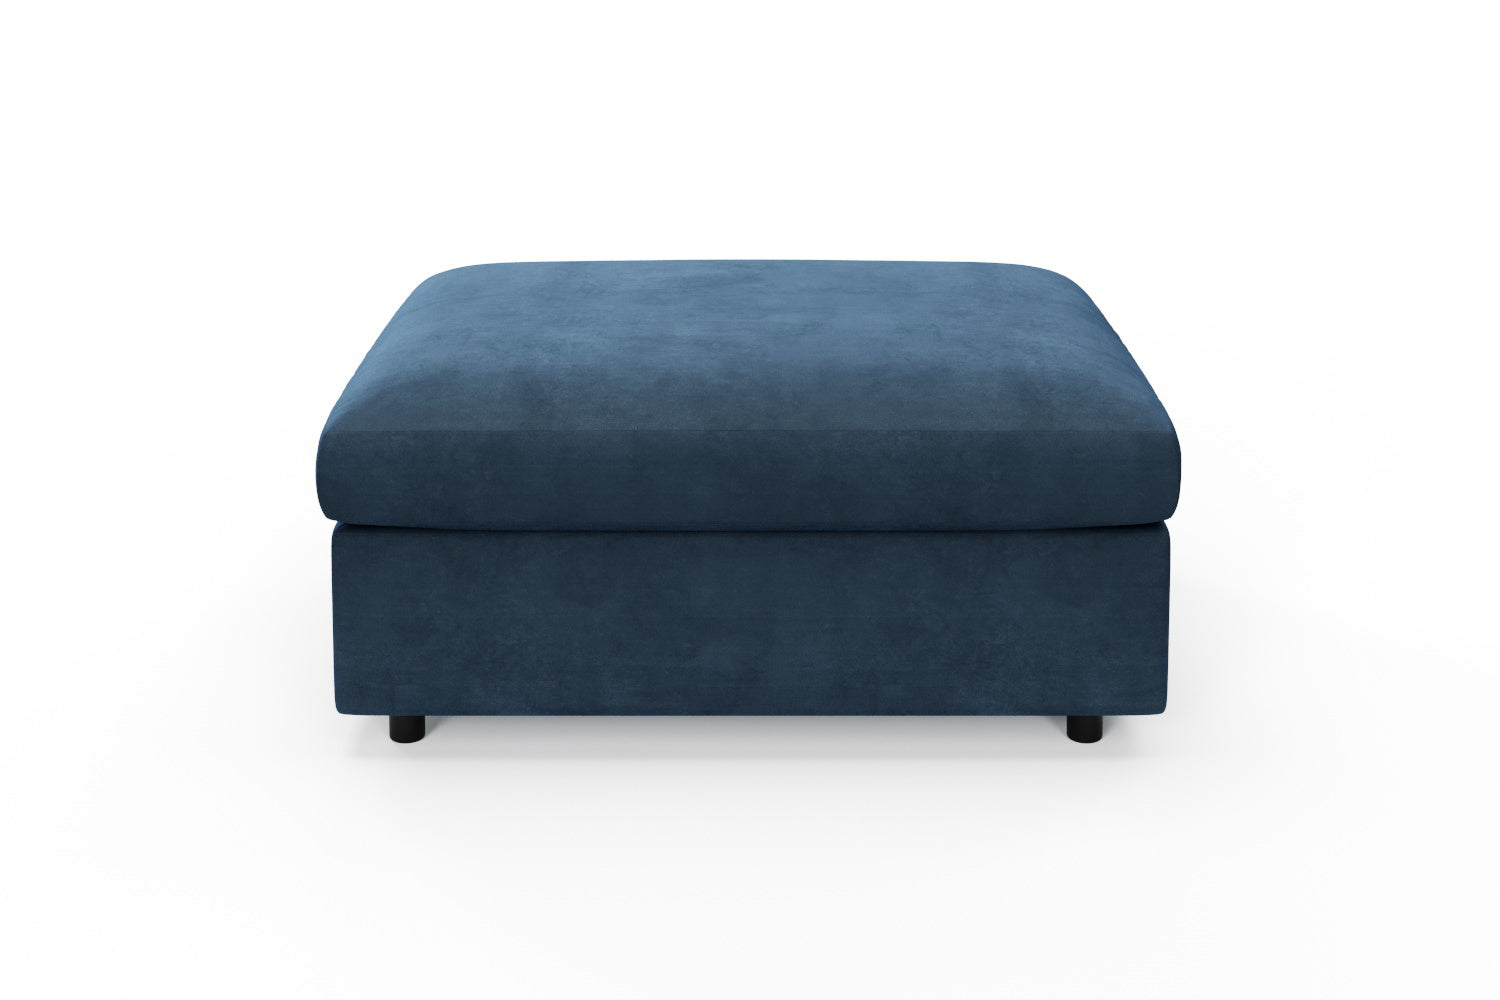 Accents - The Footstool Bed - Blue Steel